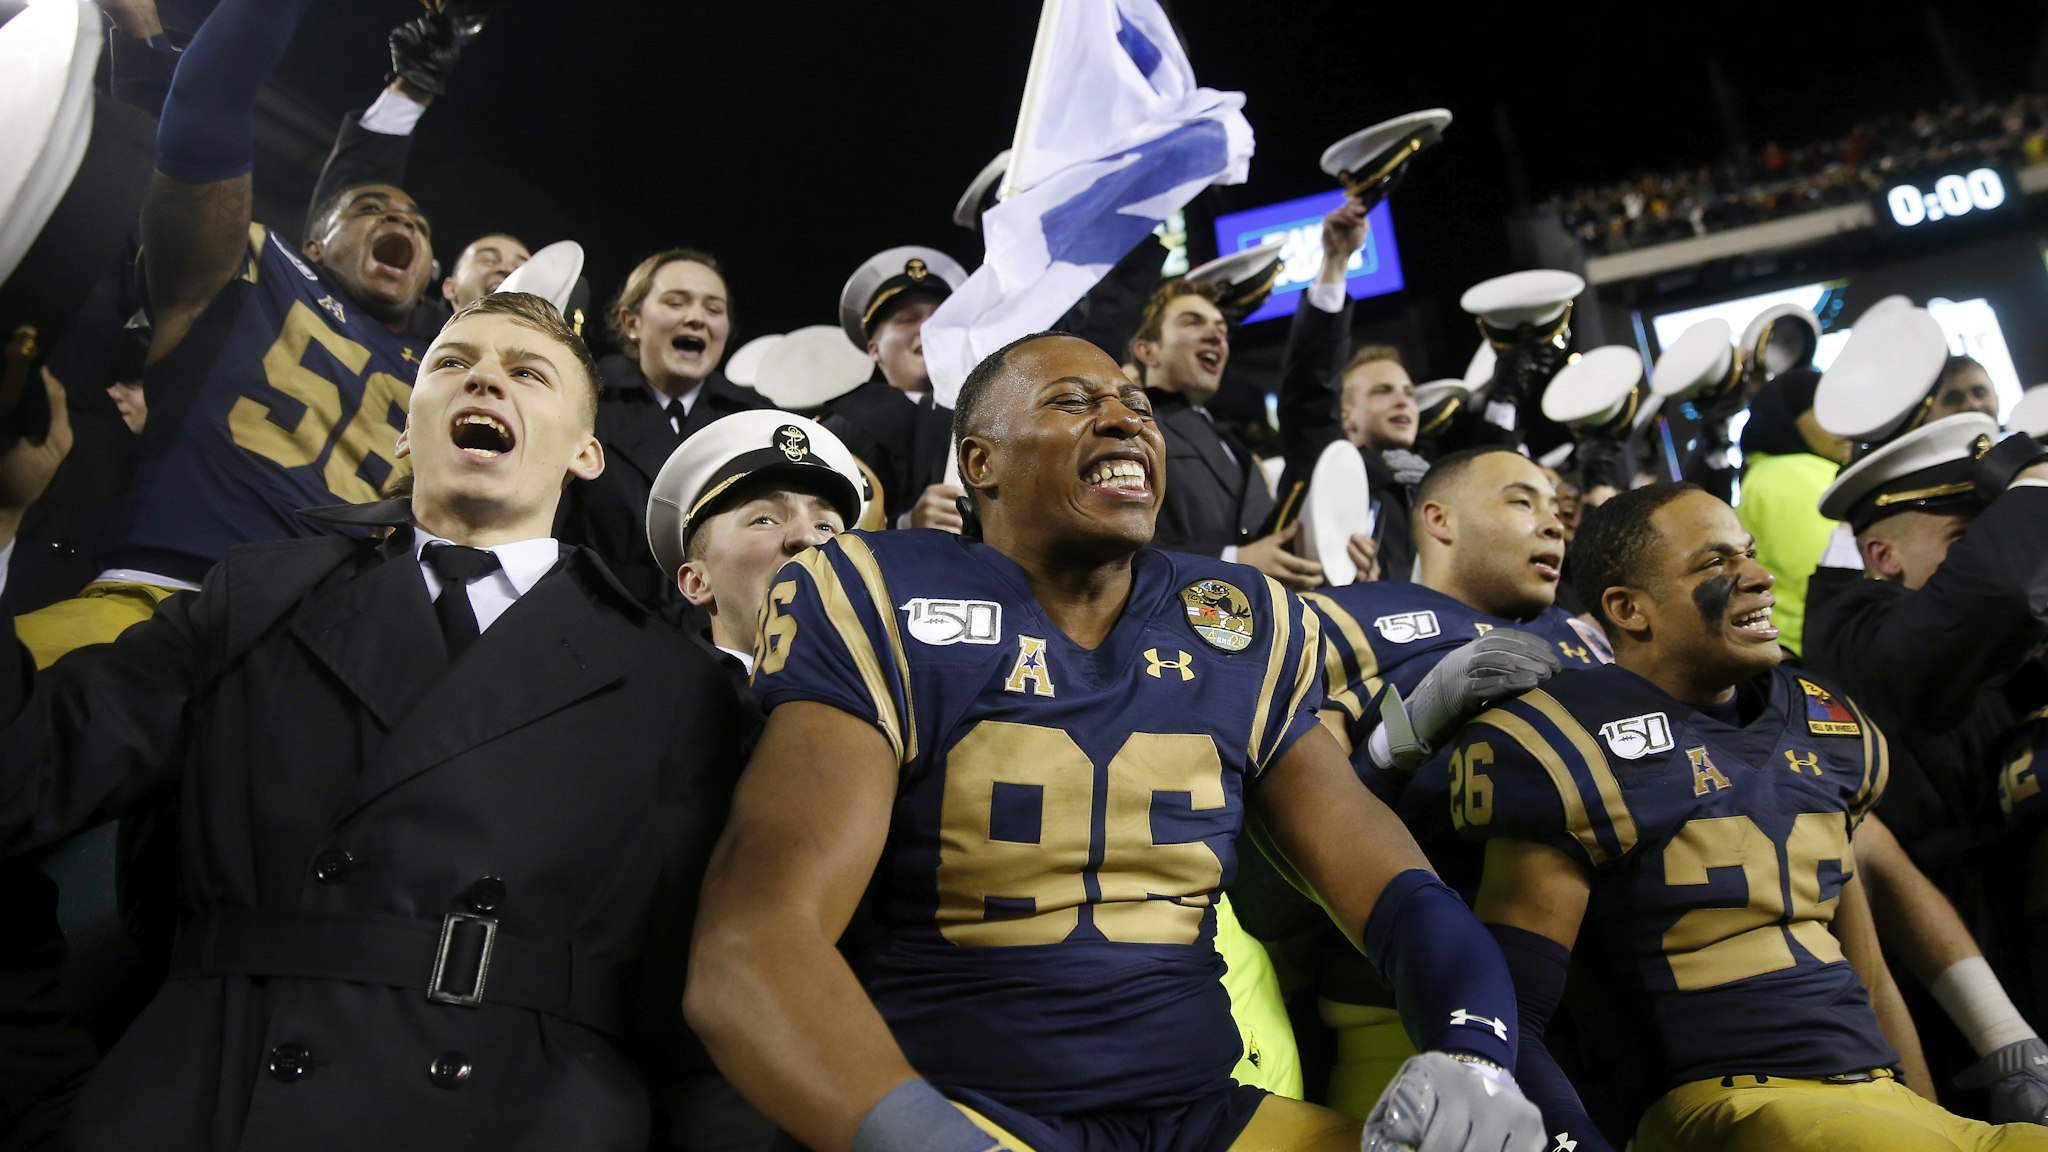 PHILADELPHIA, PENNSYLVANIA - DECEMBER 14: OJ Davis #86 and the rest of the Navy Midshipmen celebrate the win over the Army Black Knights at Lincoln Financial Field on December 14, 2019 in Philadelphia, Pennsylvania.The Navy Midshipmen defeated the Army Black Knights 31-7.